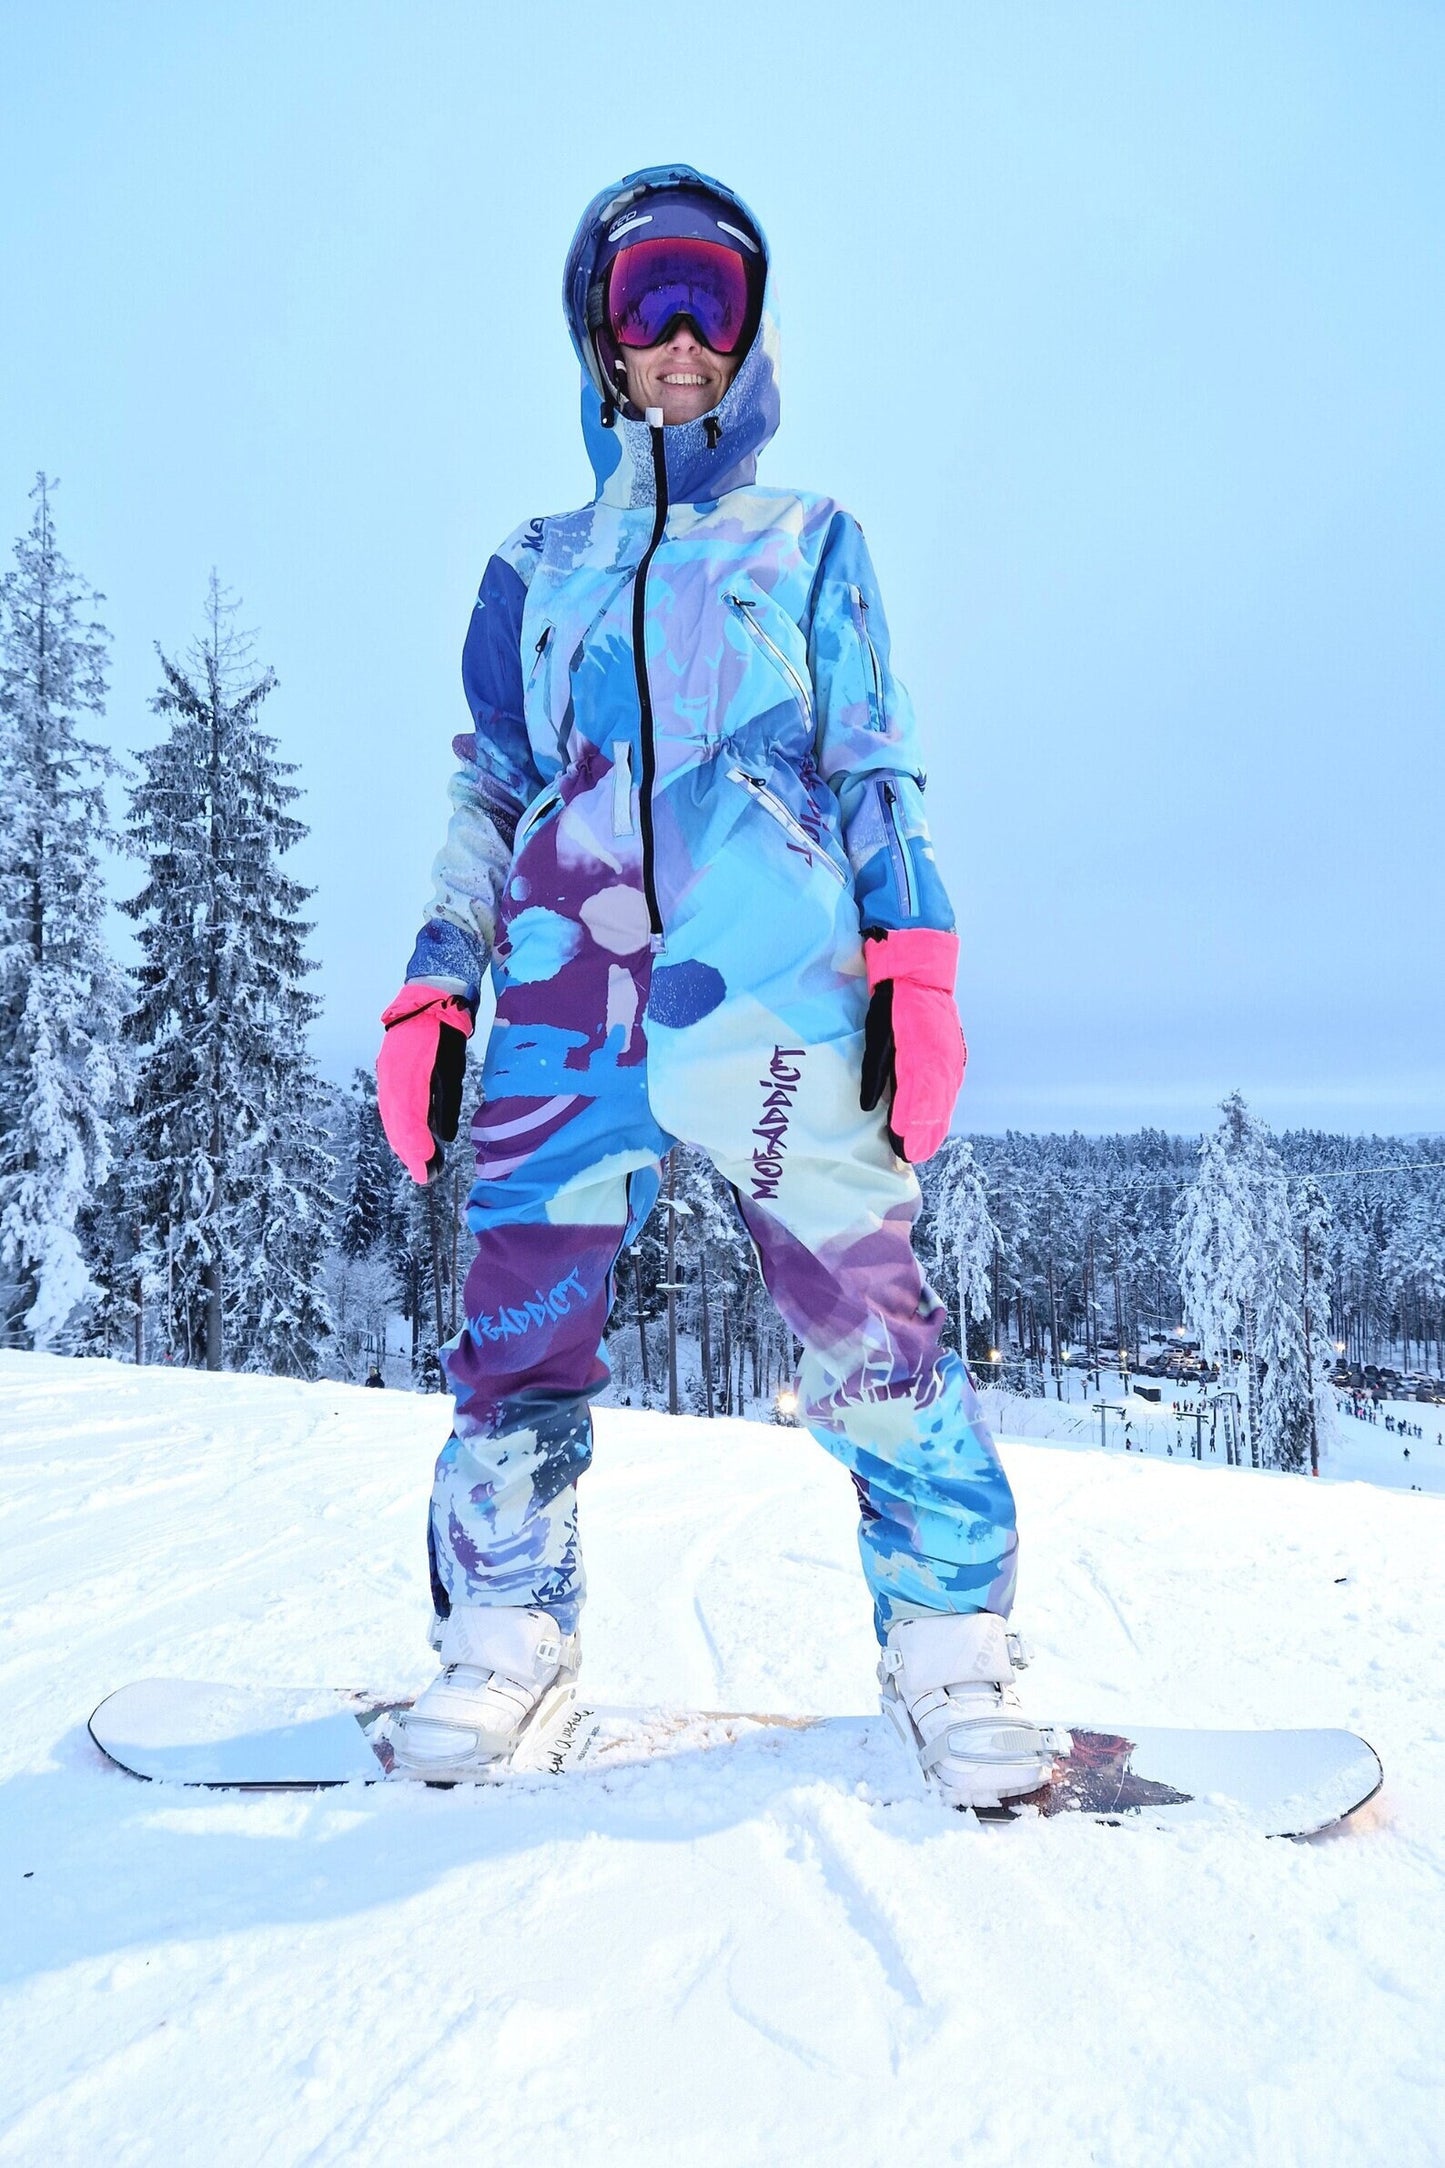 SET: Purple Winter Ski Jumpsuit, Snowboard Clothes, Snowboard suit, Skiing Overall, Women Mountain's clothes, Winter Thermal underwear